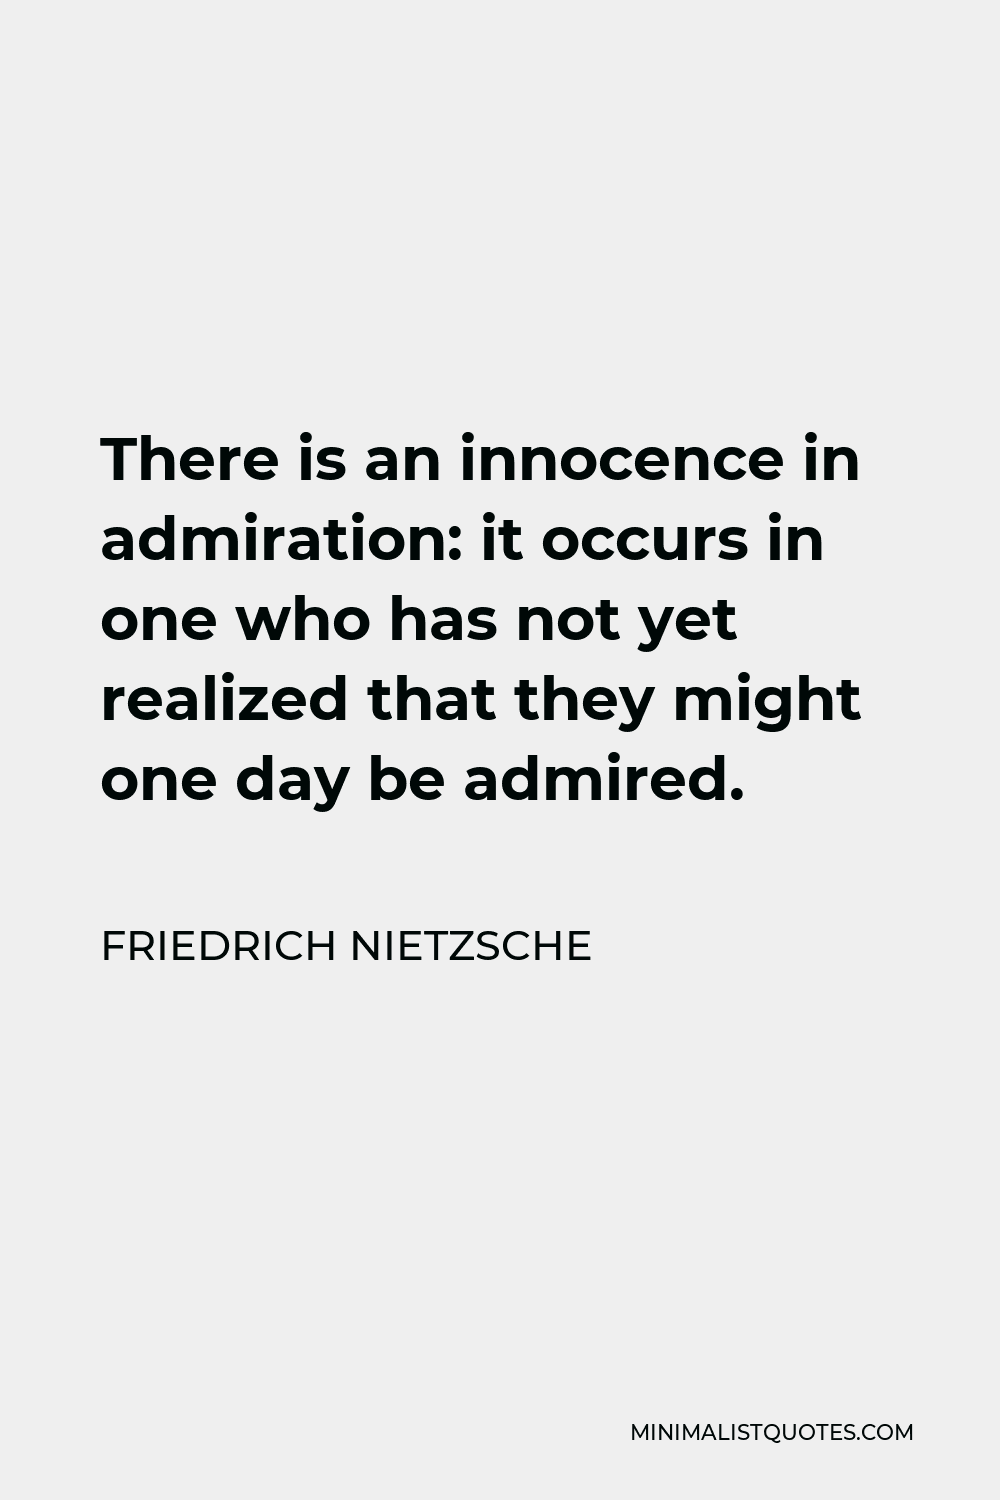 Friedrich Nietzsche Quote - There is an innocence in admiration: it occurs in one who has not yet realized that they might one day be admired.